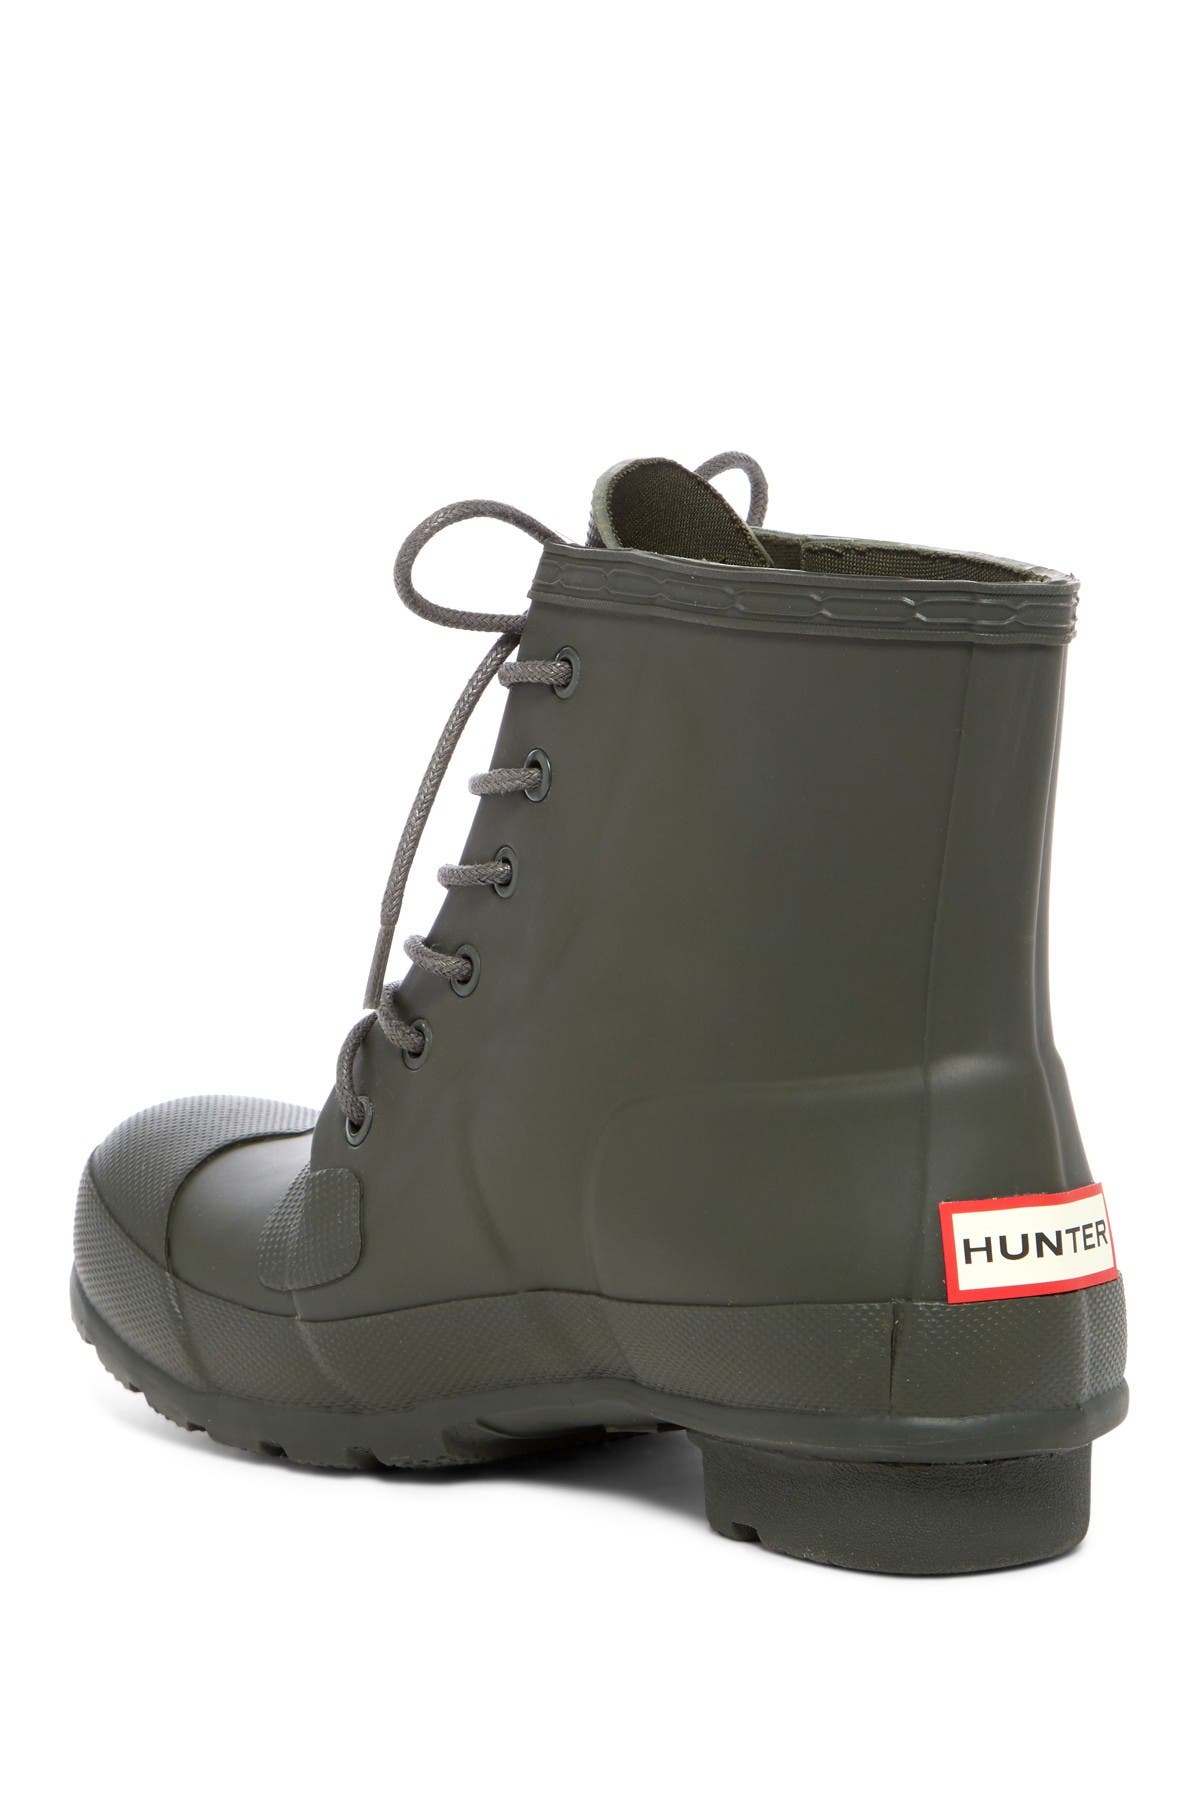 hunter rain boots with laces